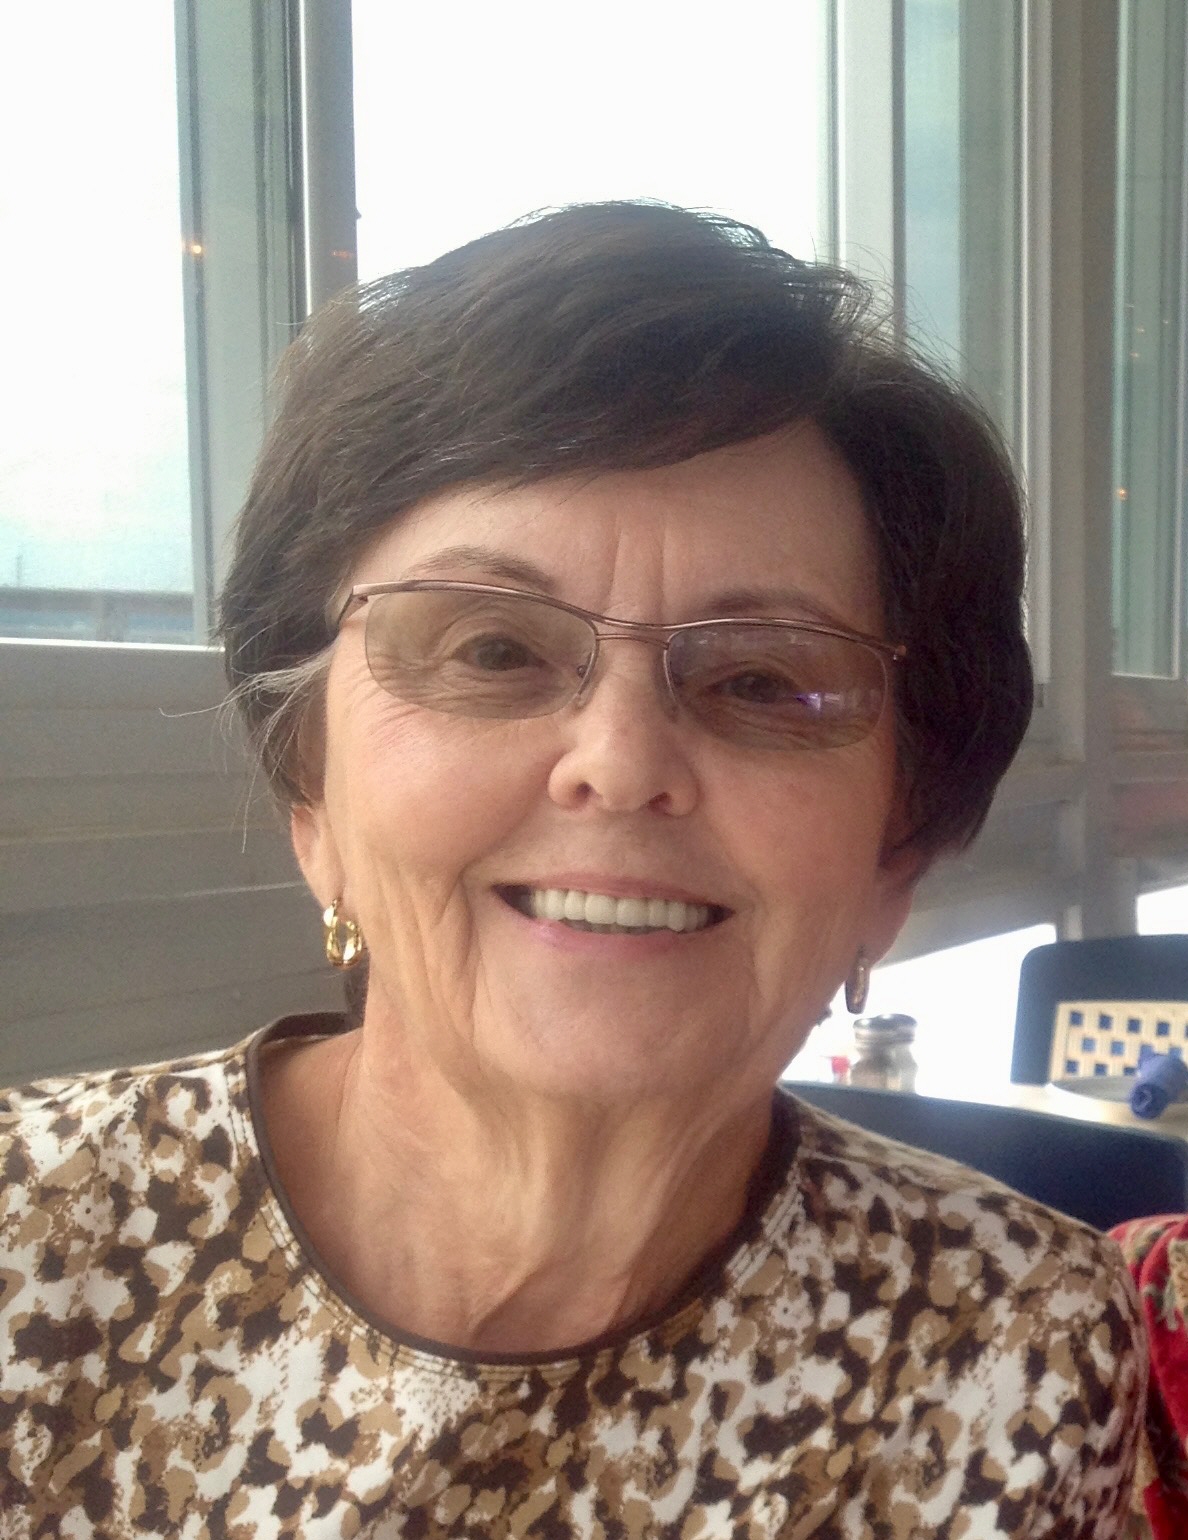 Obituary information for Betty Sue Lee Johnson